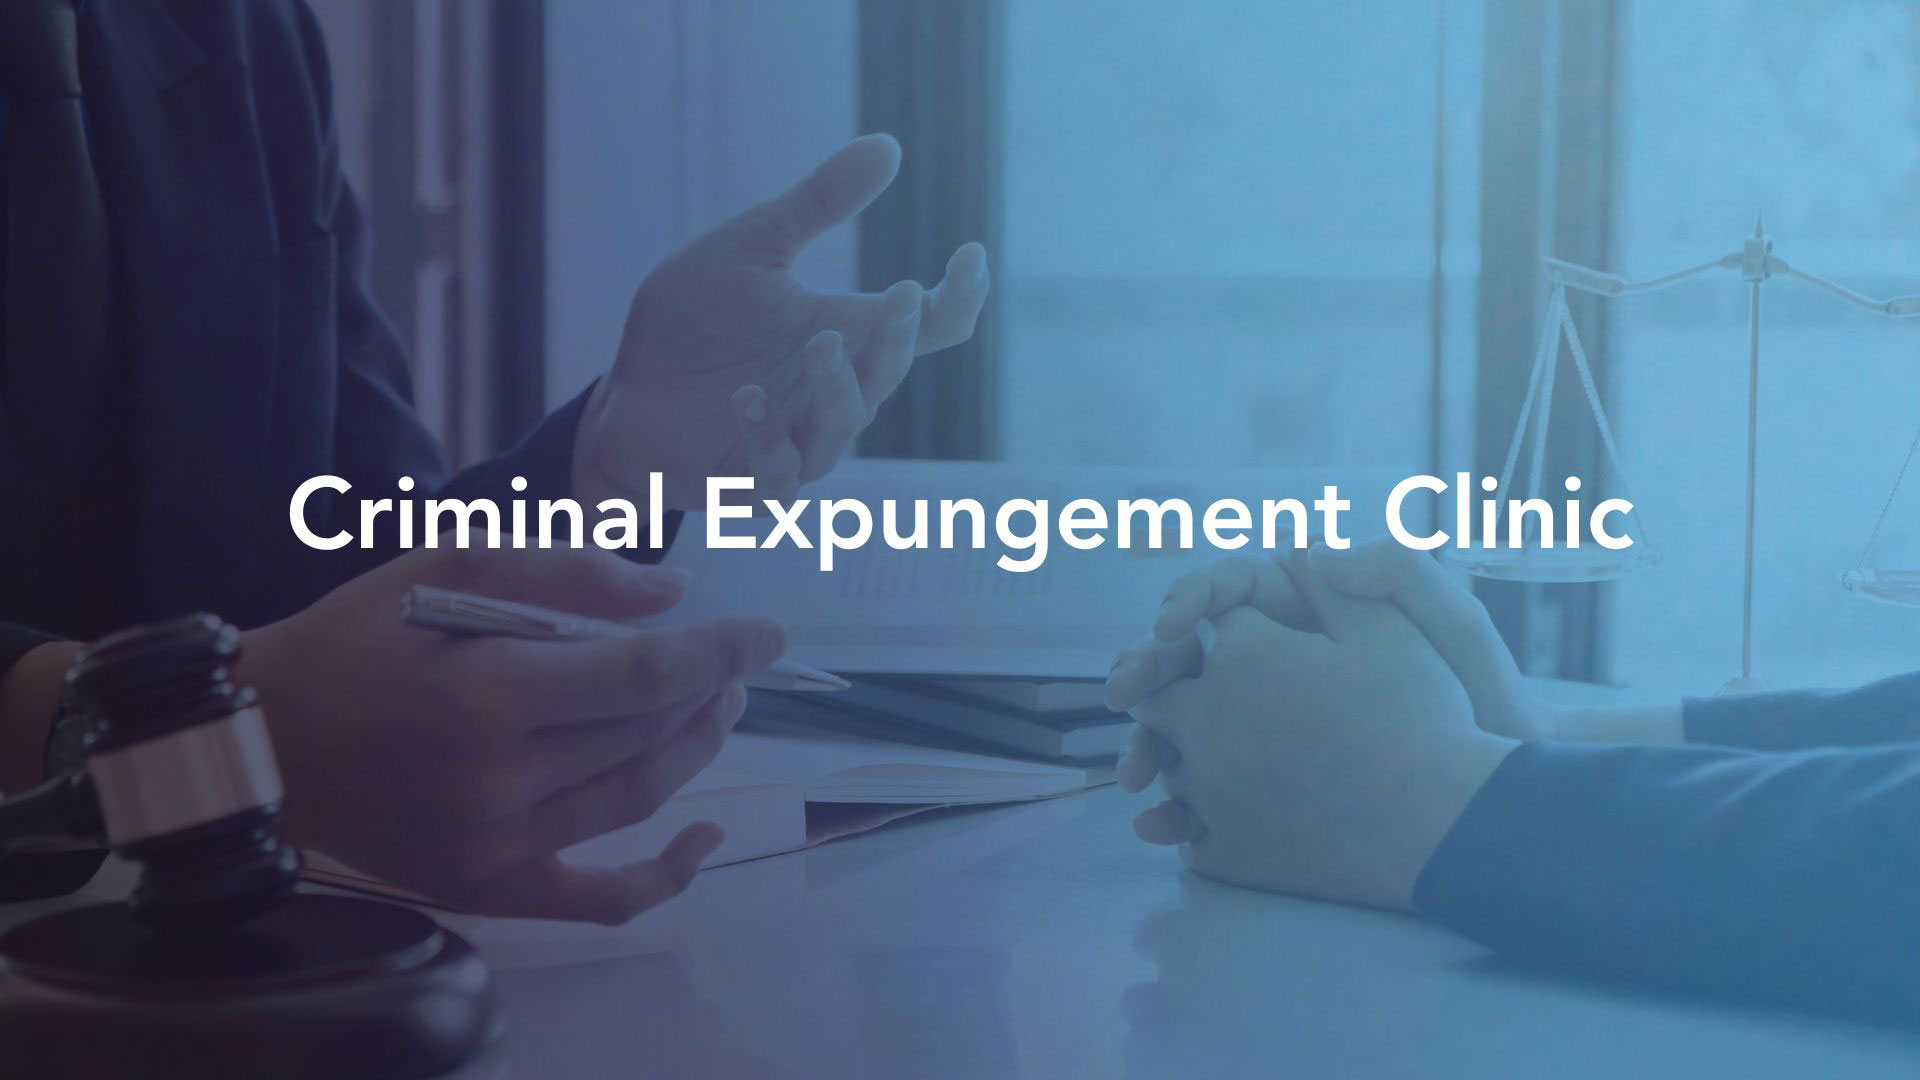 Text Criminal Expungement Clinic over image